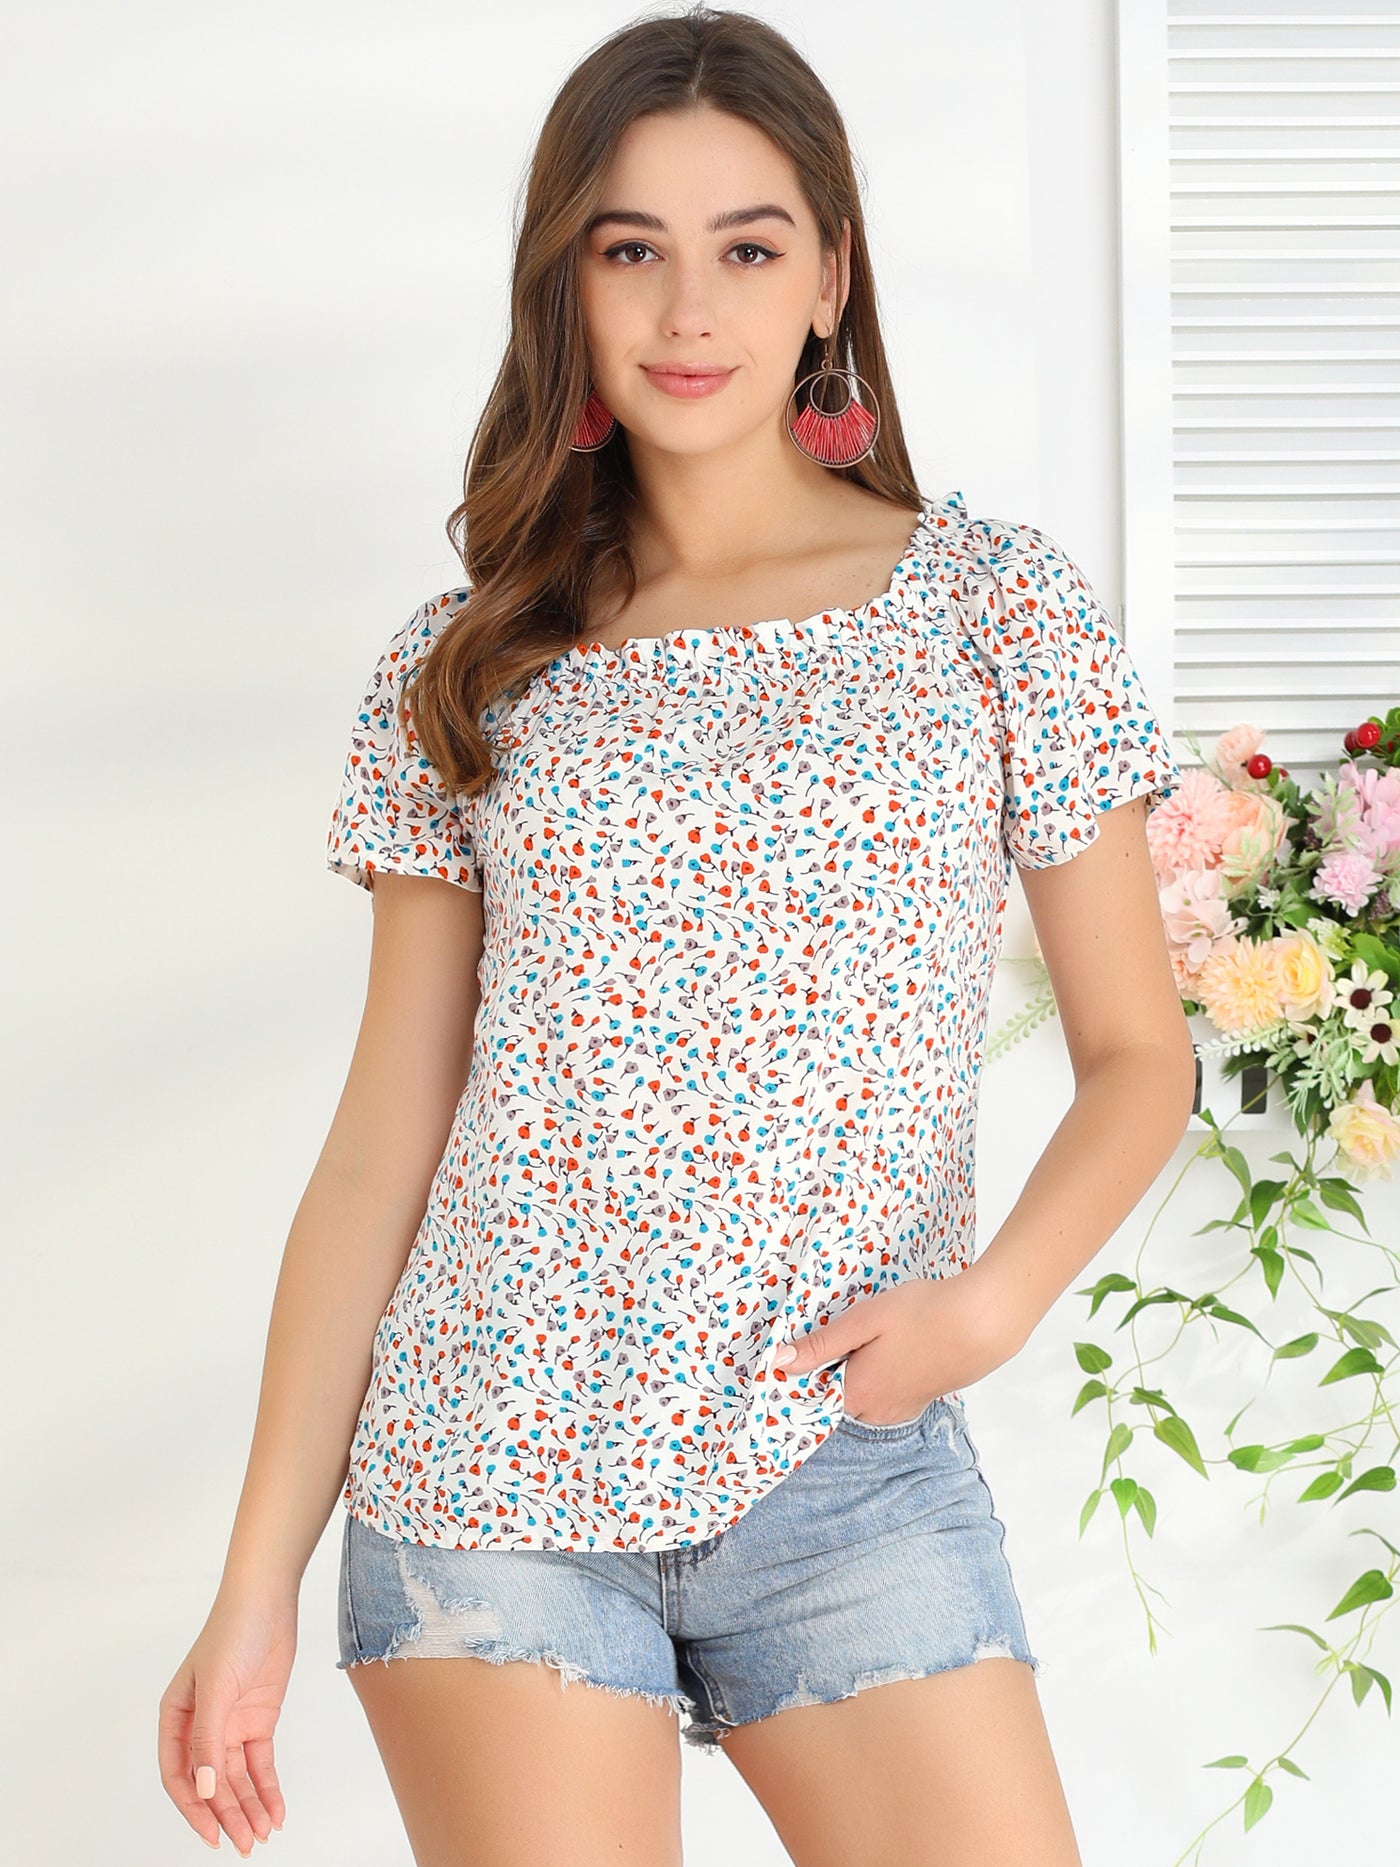 Allegra K Casual Square Ruffle Neck Blouse Short Sleeve Summer Floral Tops